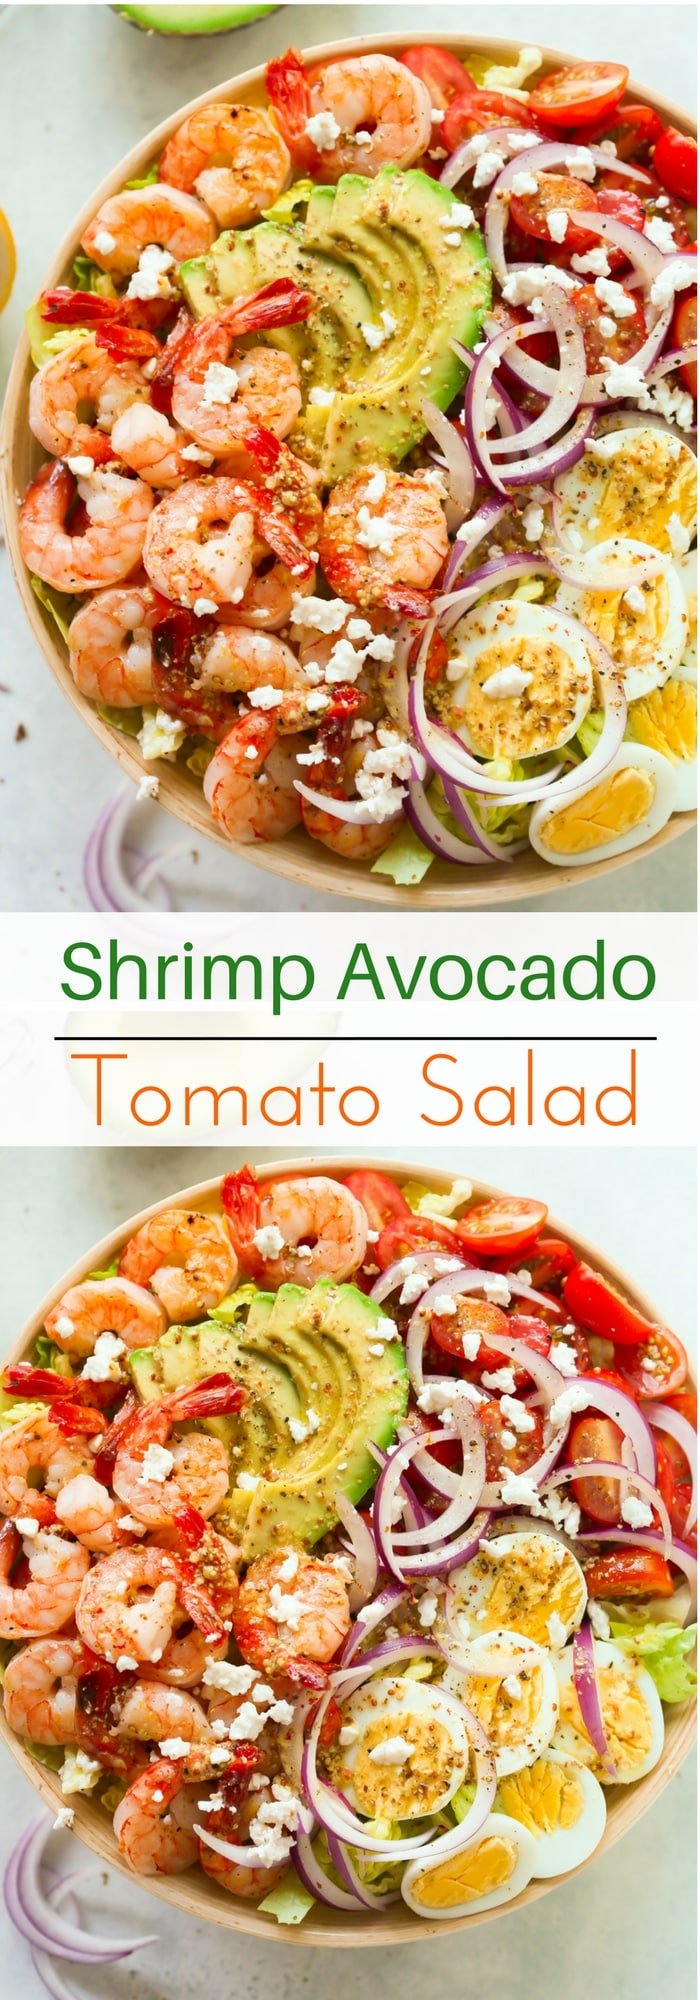 Shrimp Avocado Tomato Salad - Looking for a high-protein salad? How about this delicious Shrimp Avocado Tomato Salad recipe?! It's fresh, healthy, easy and quick to make!